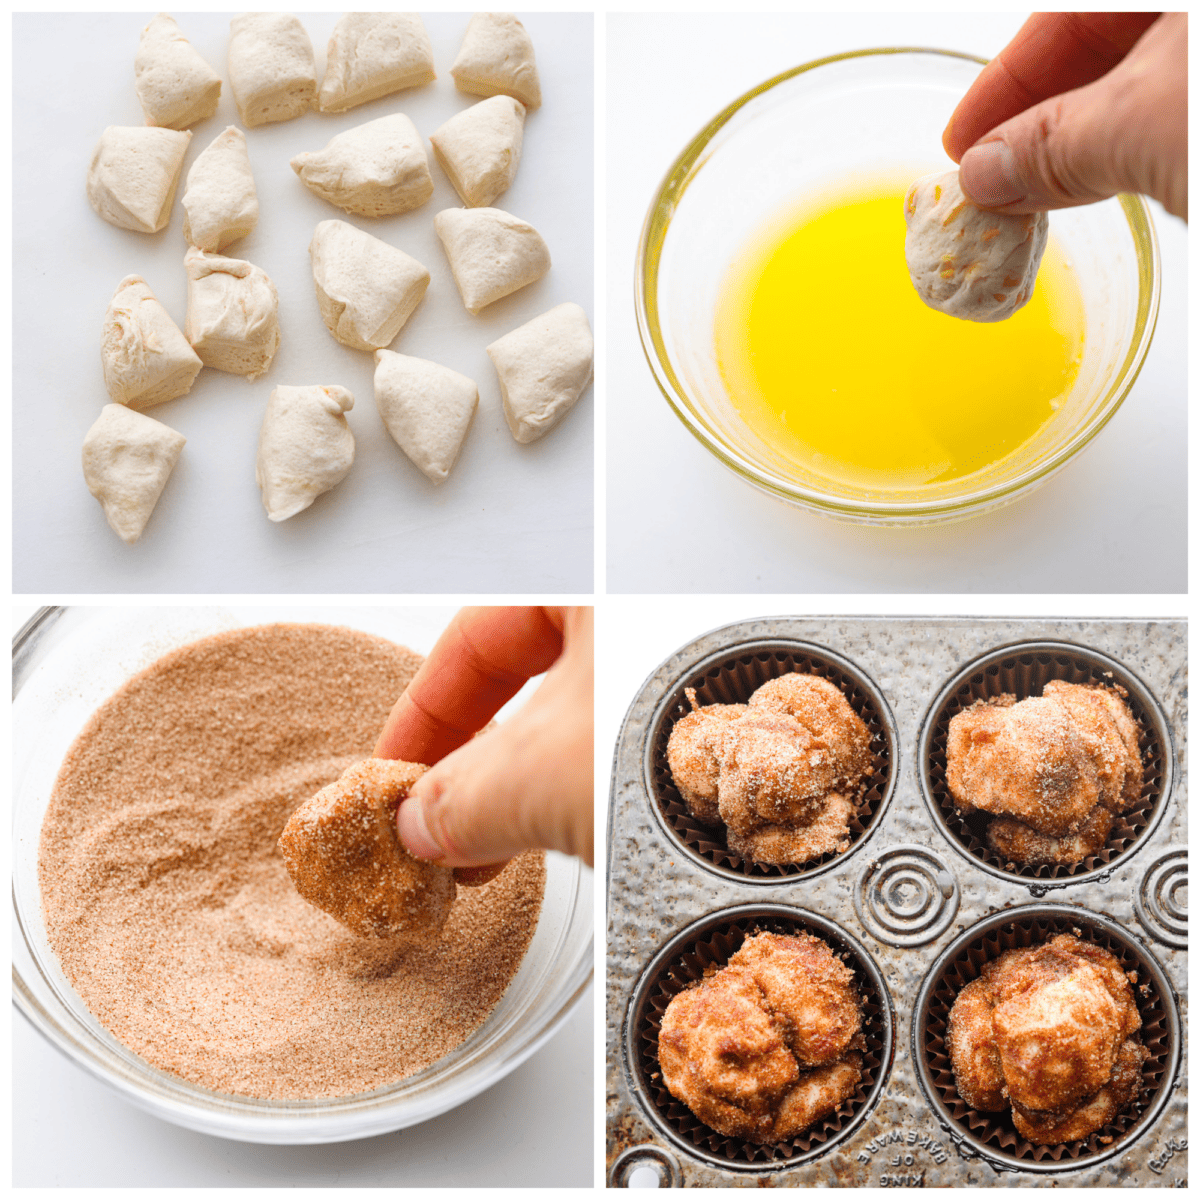 4-photo collage of biscuit pieces being dipped in a cinnamon sugar butter mixture.